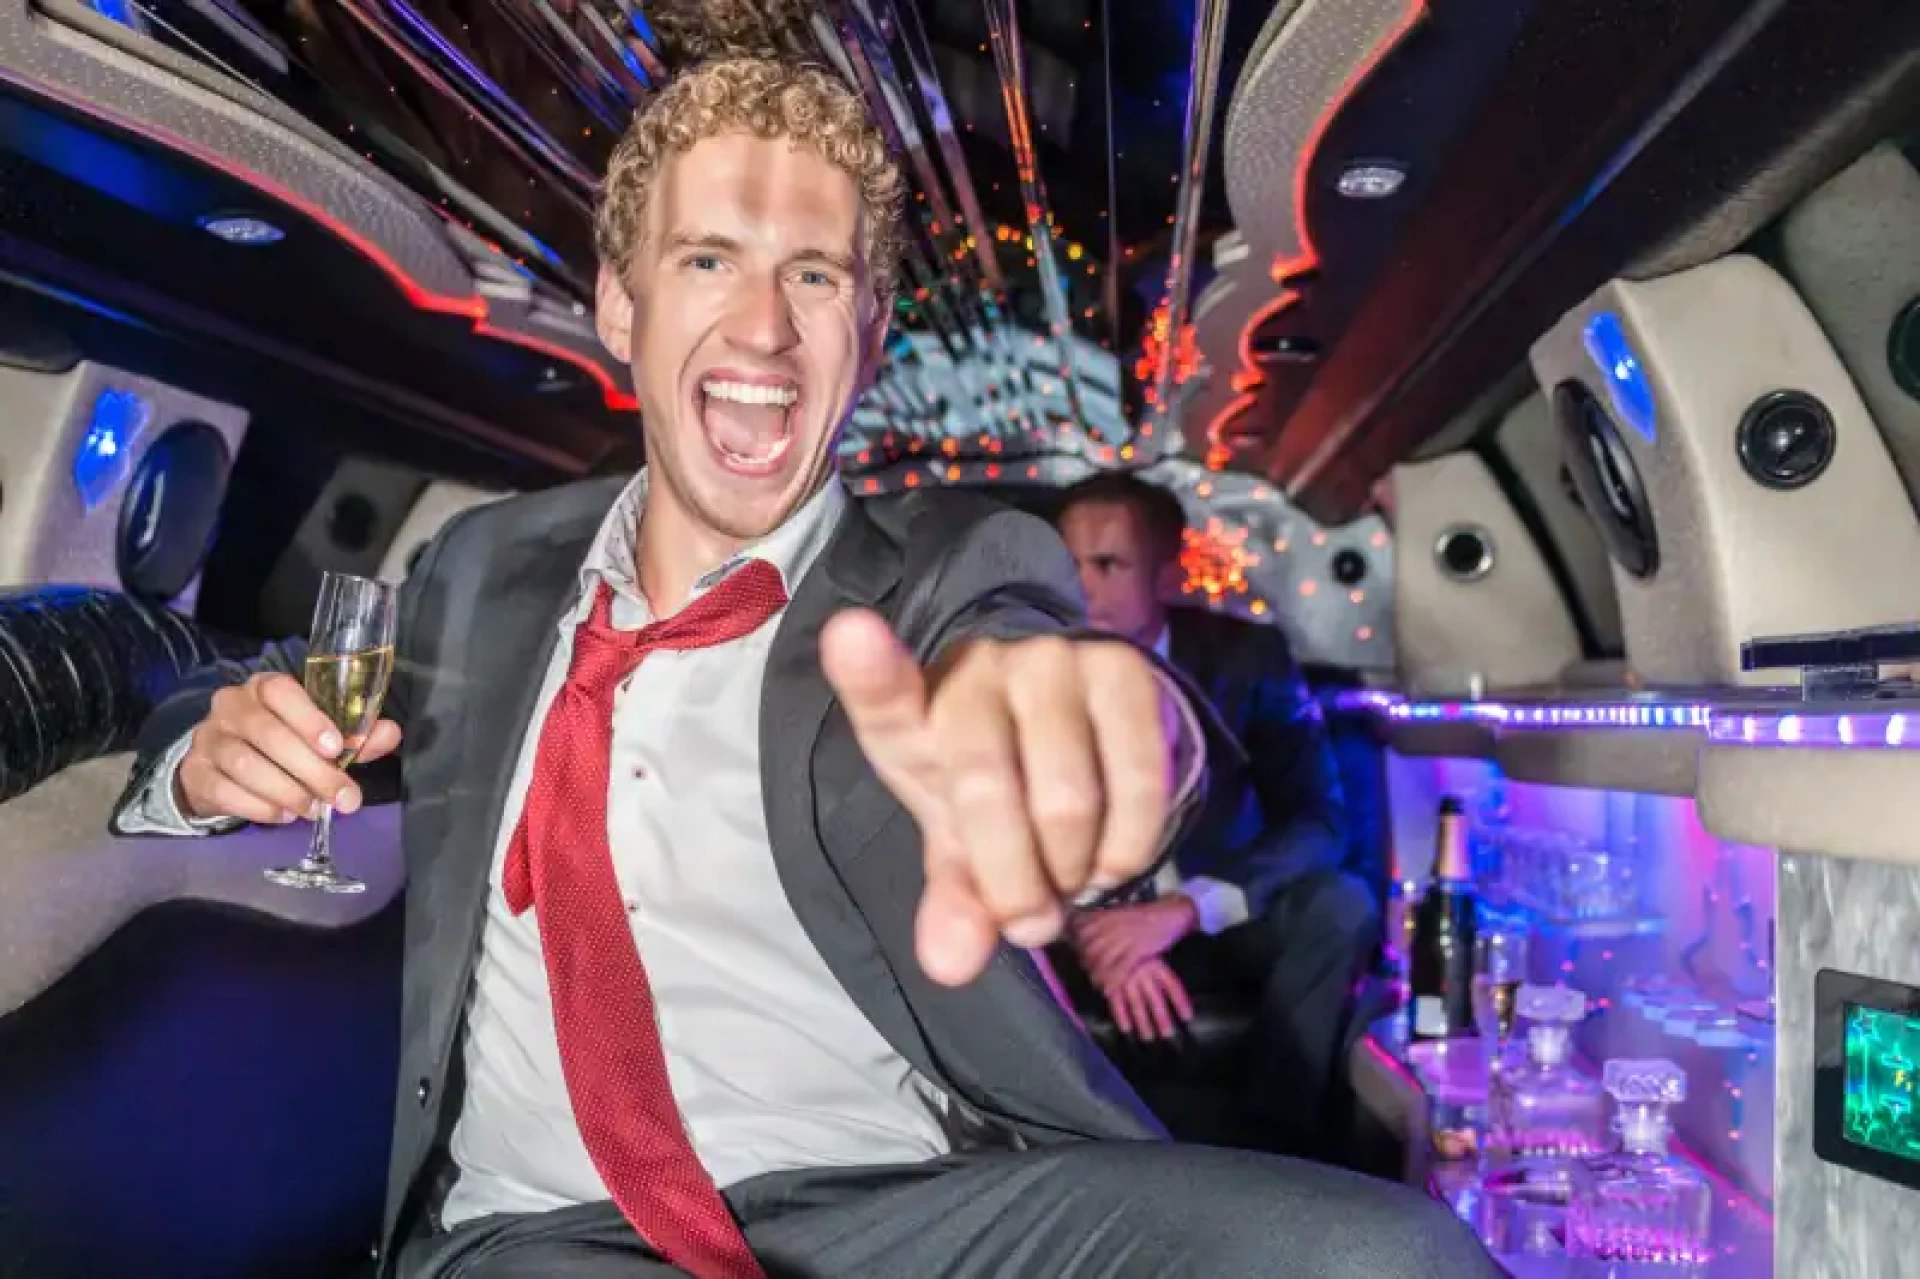 man partying in a limousine